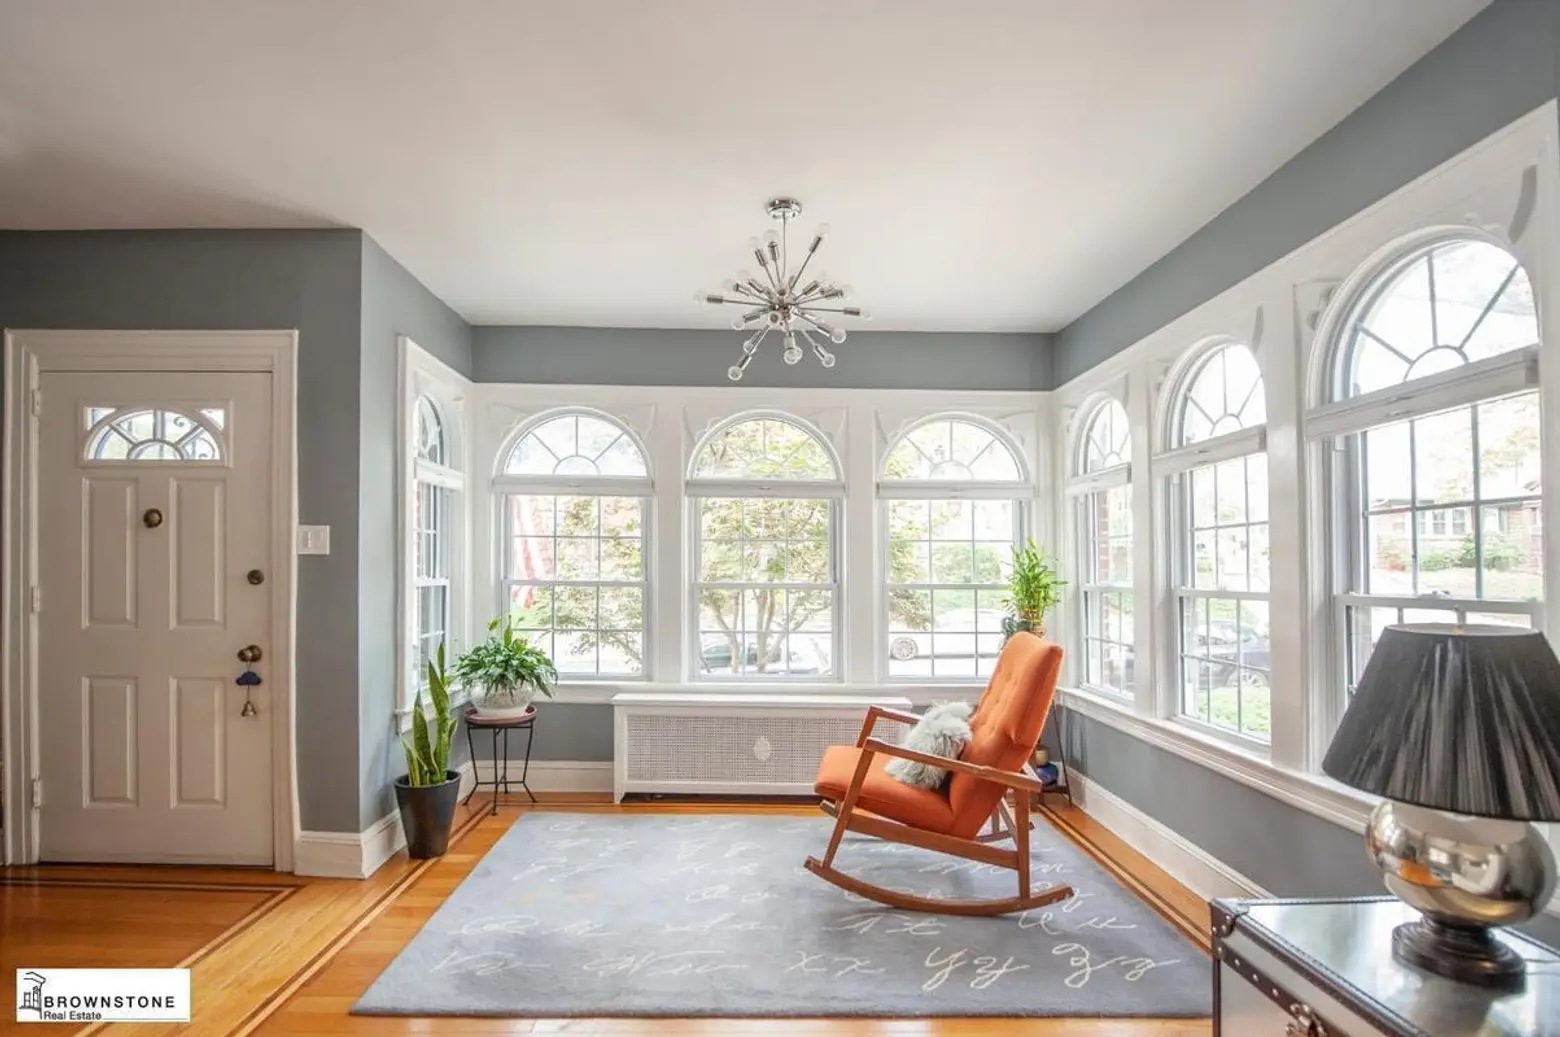 For $1.5M, this Bay Ridge colonial offers suburban living without giving up the subway